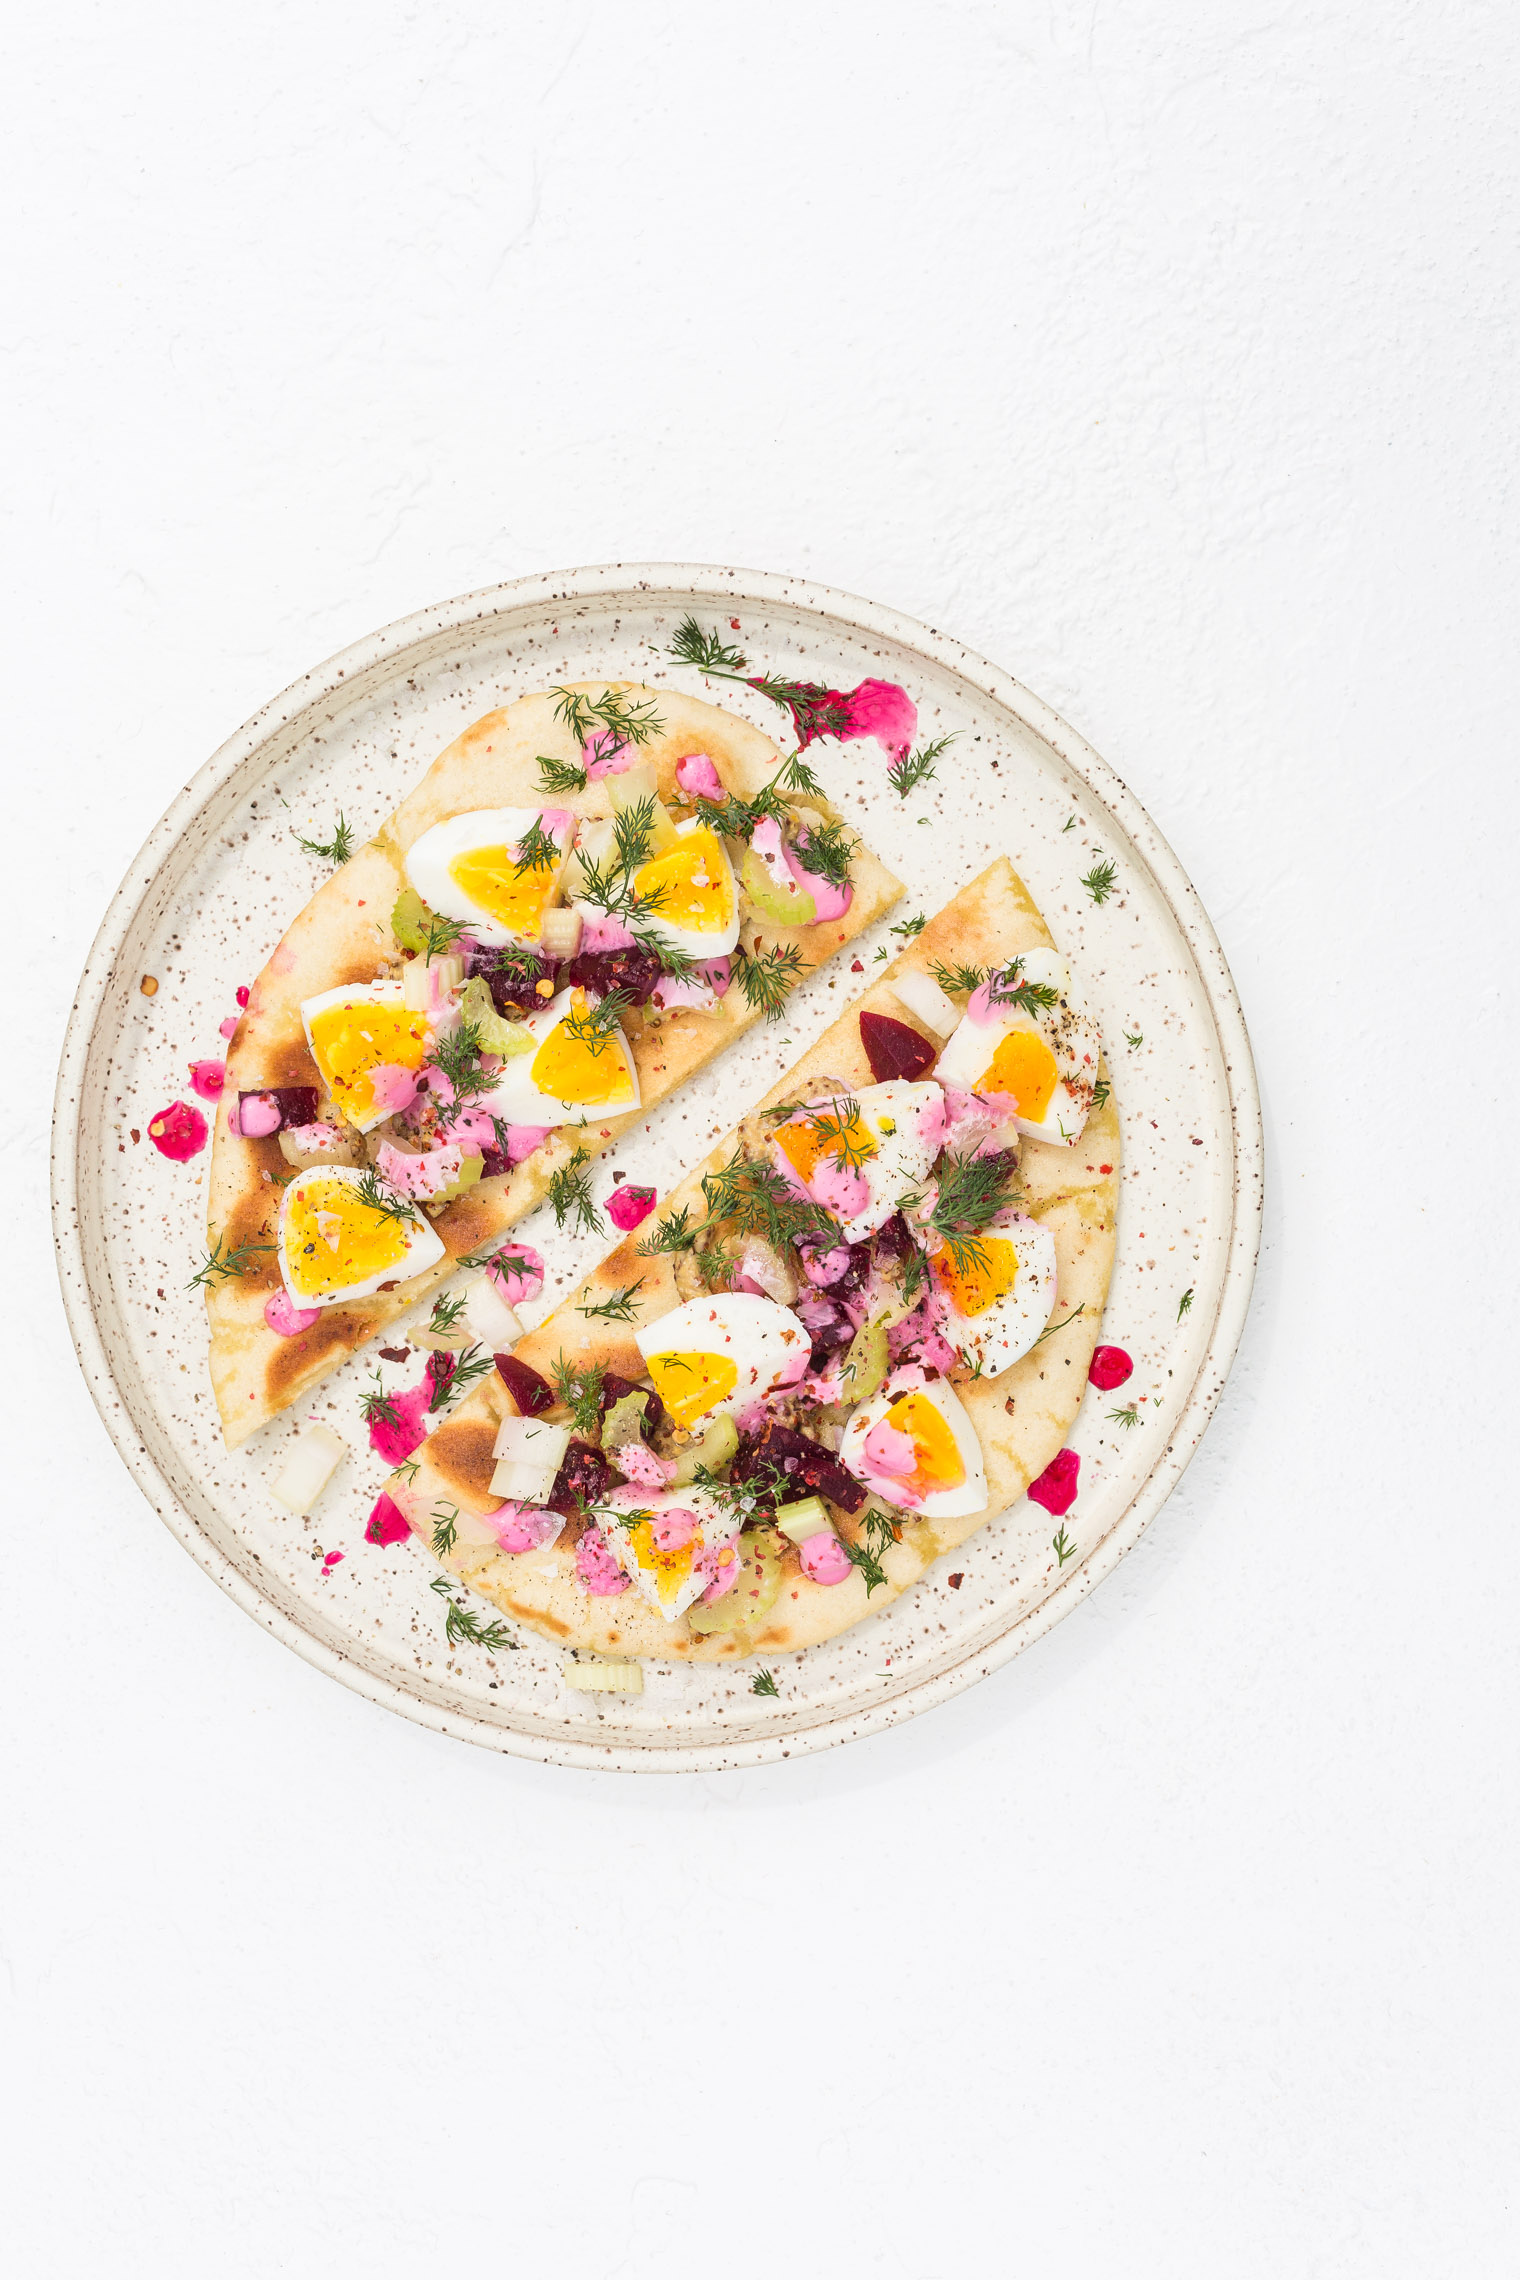 Egg Salad Recipe with Pink Mayo and Pickled Beets for One